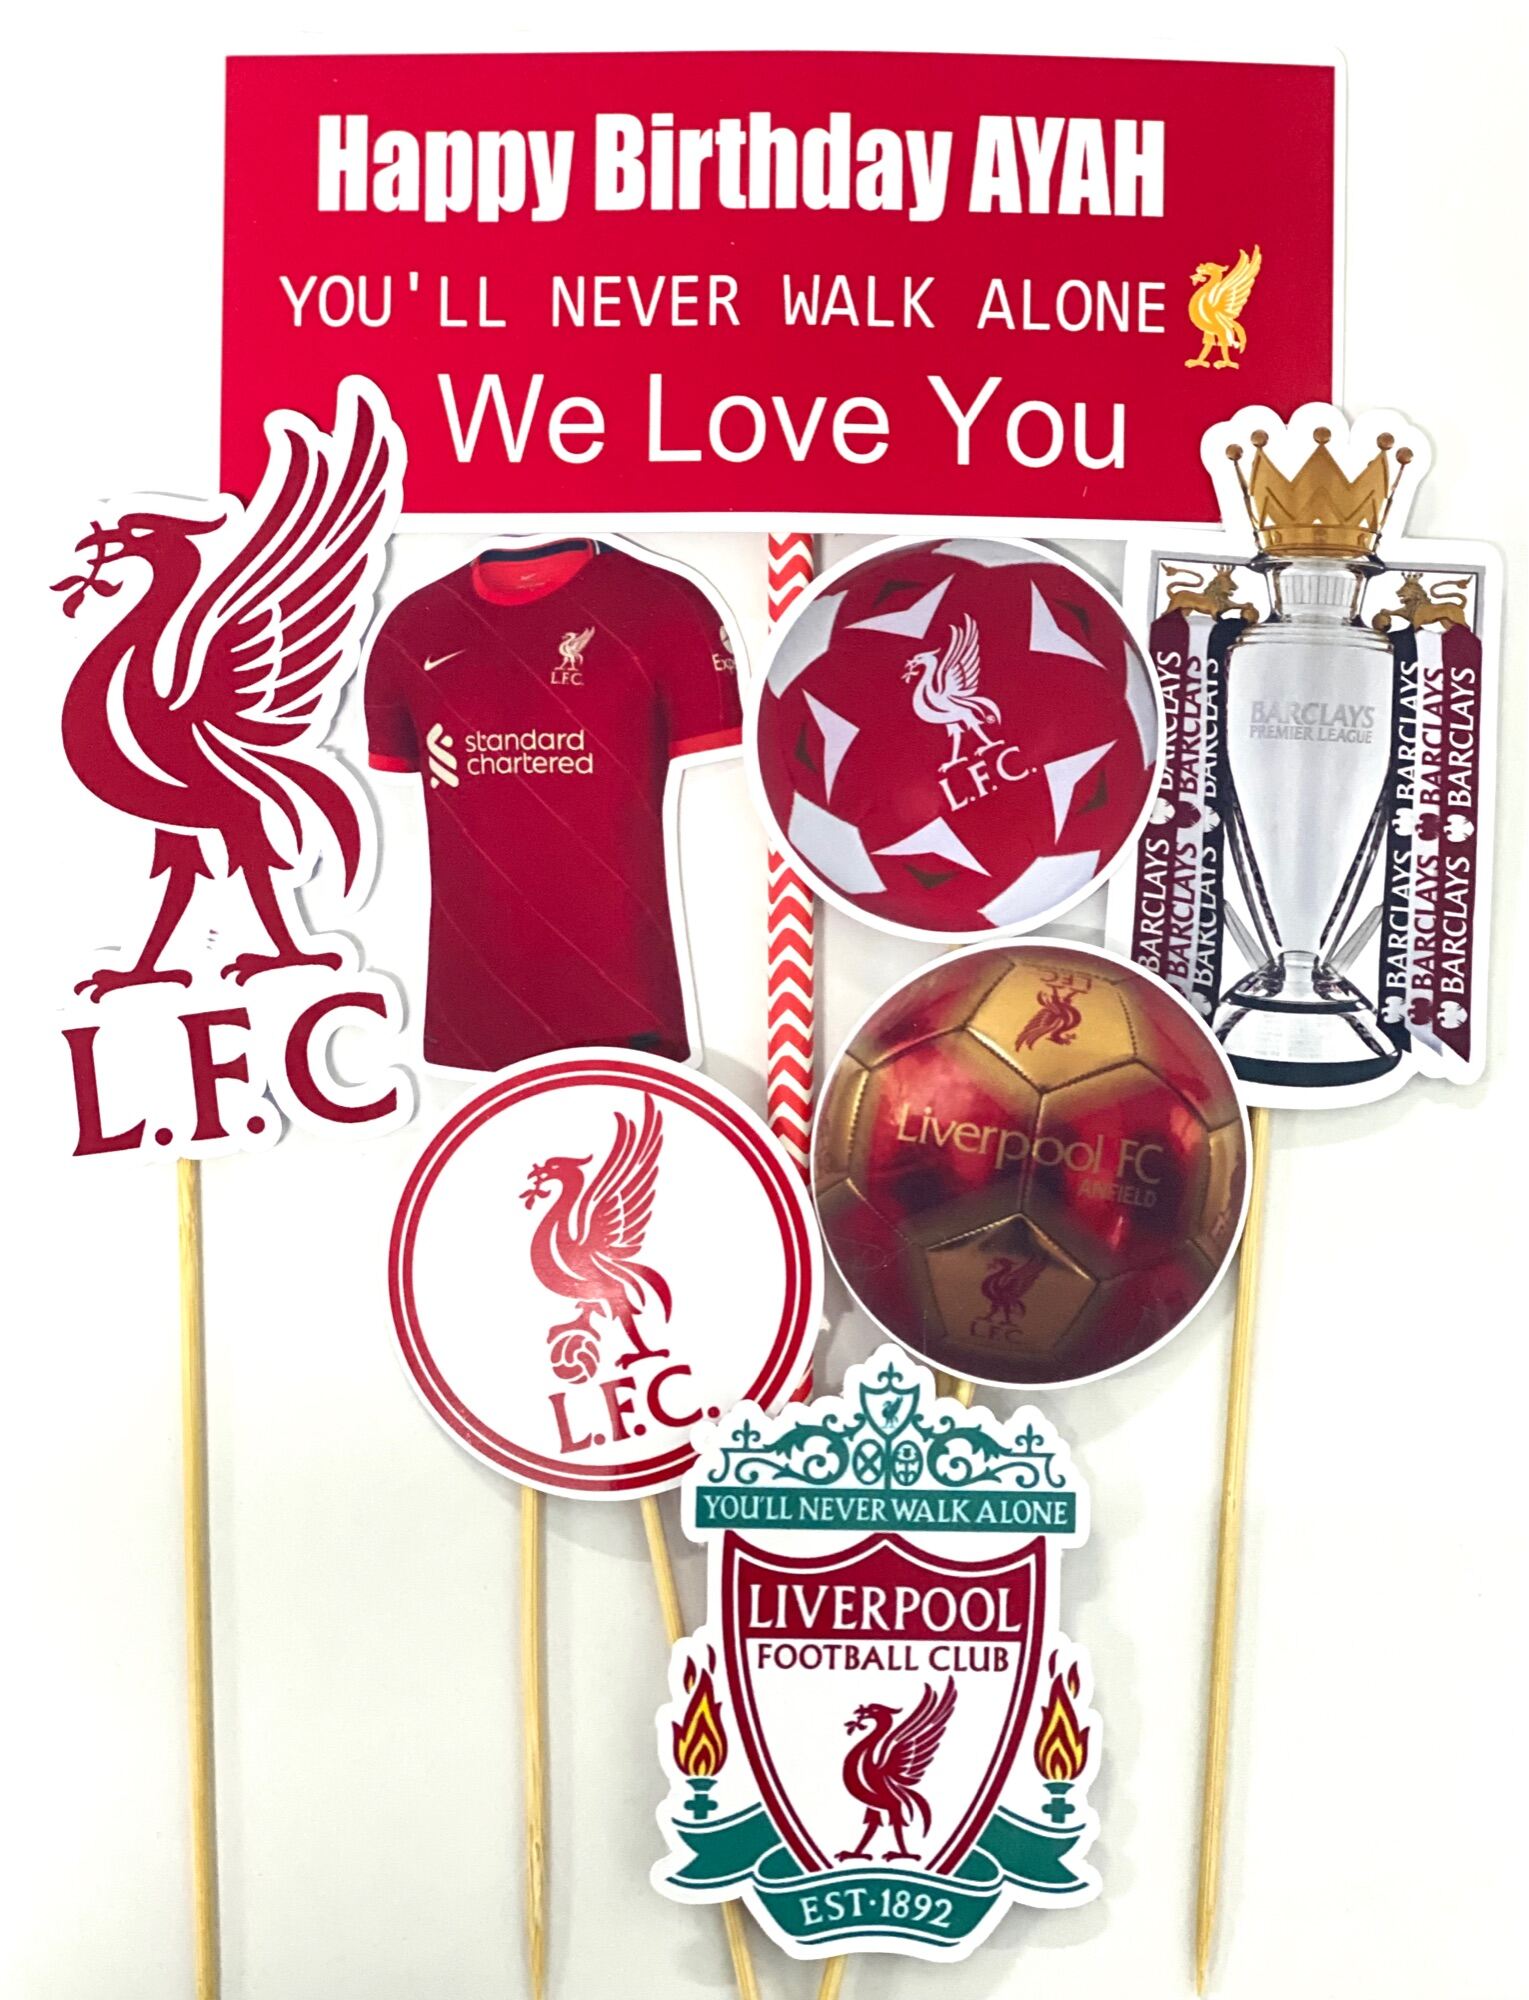 Set of 2) Cake topper & Liverpool Fan's Cake Plaque – Laser cut by Jarcoz